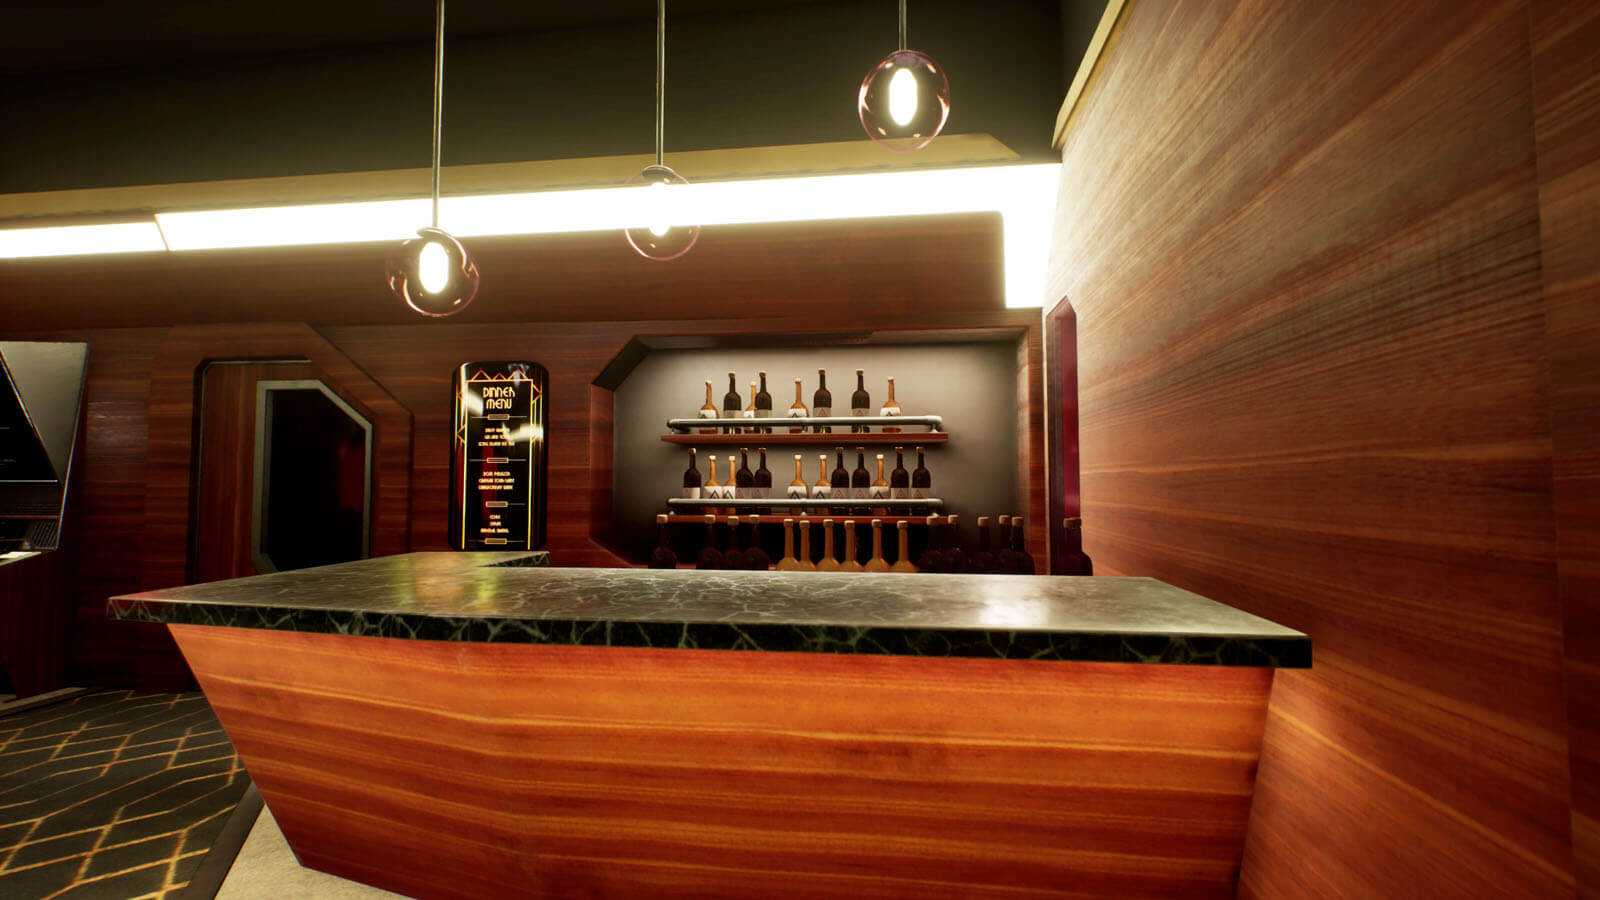 Counter-level view of a 3D bar with various bottles on a shelf behind it